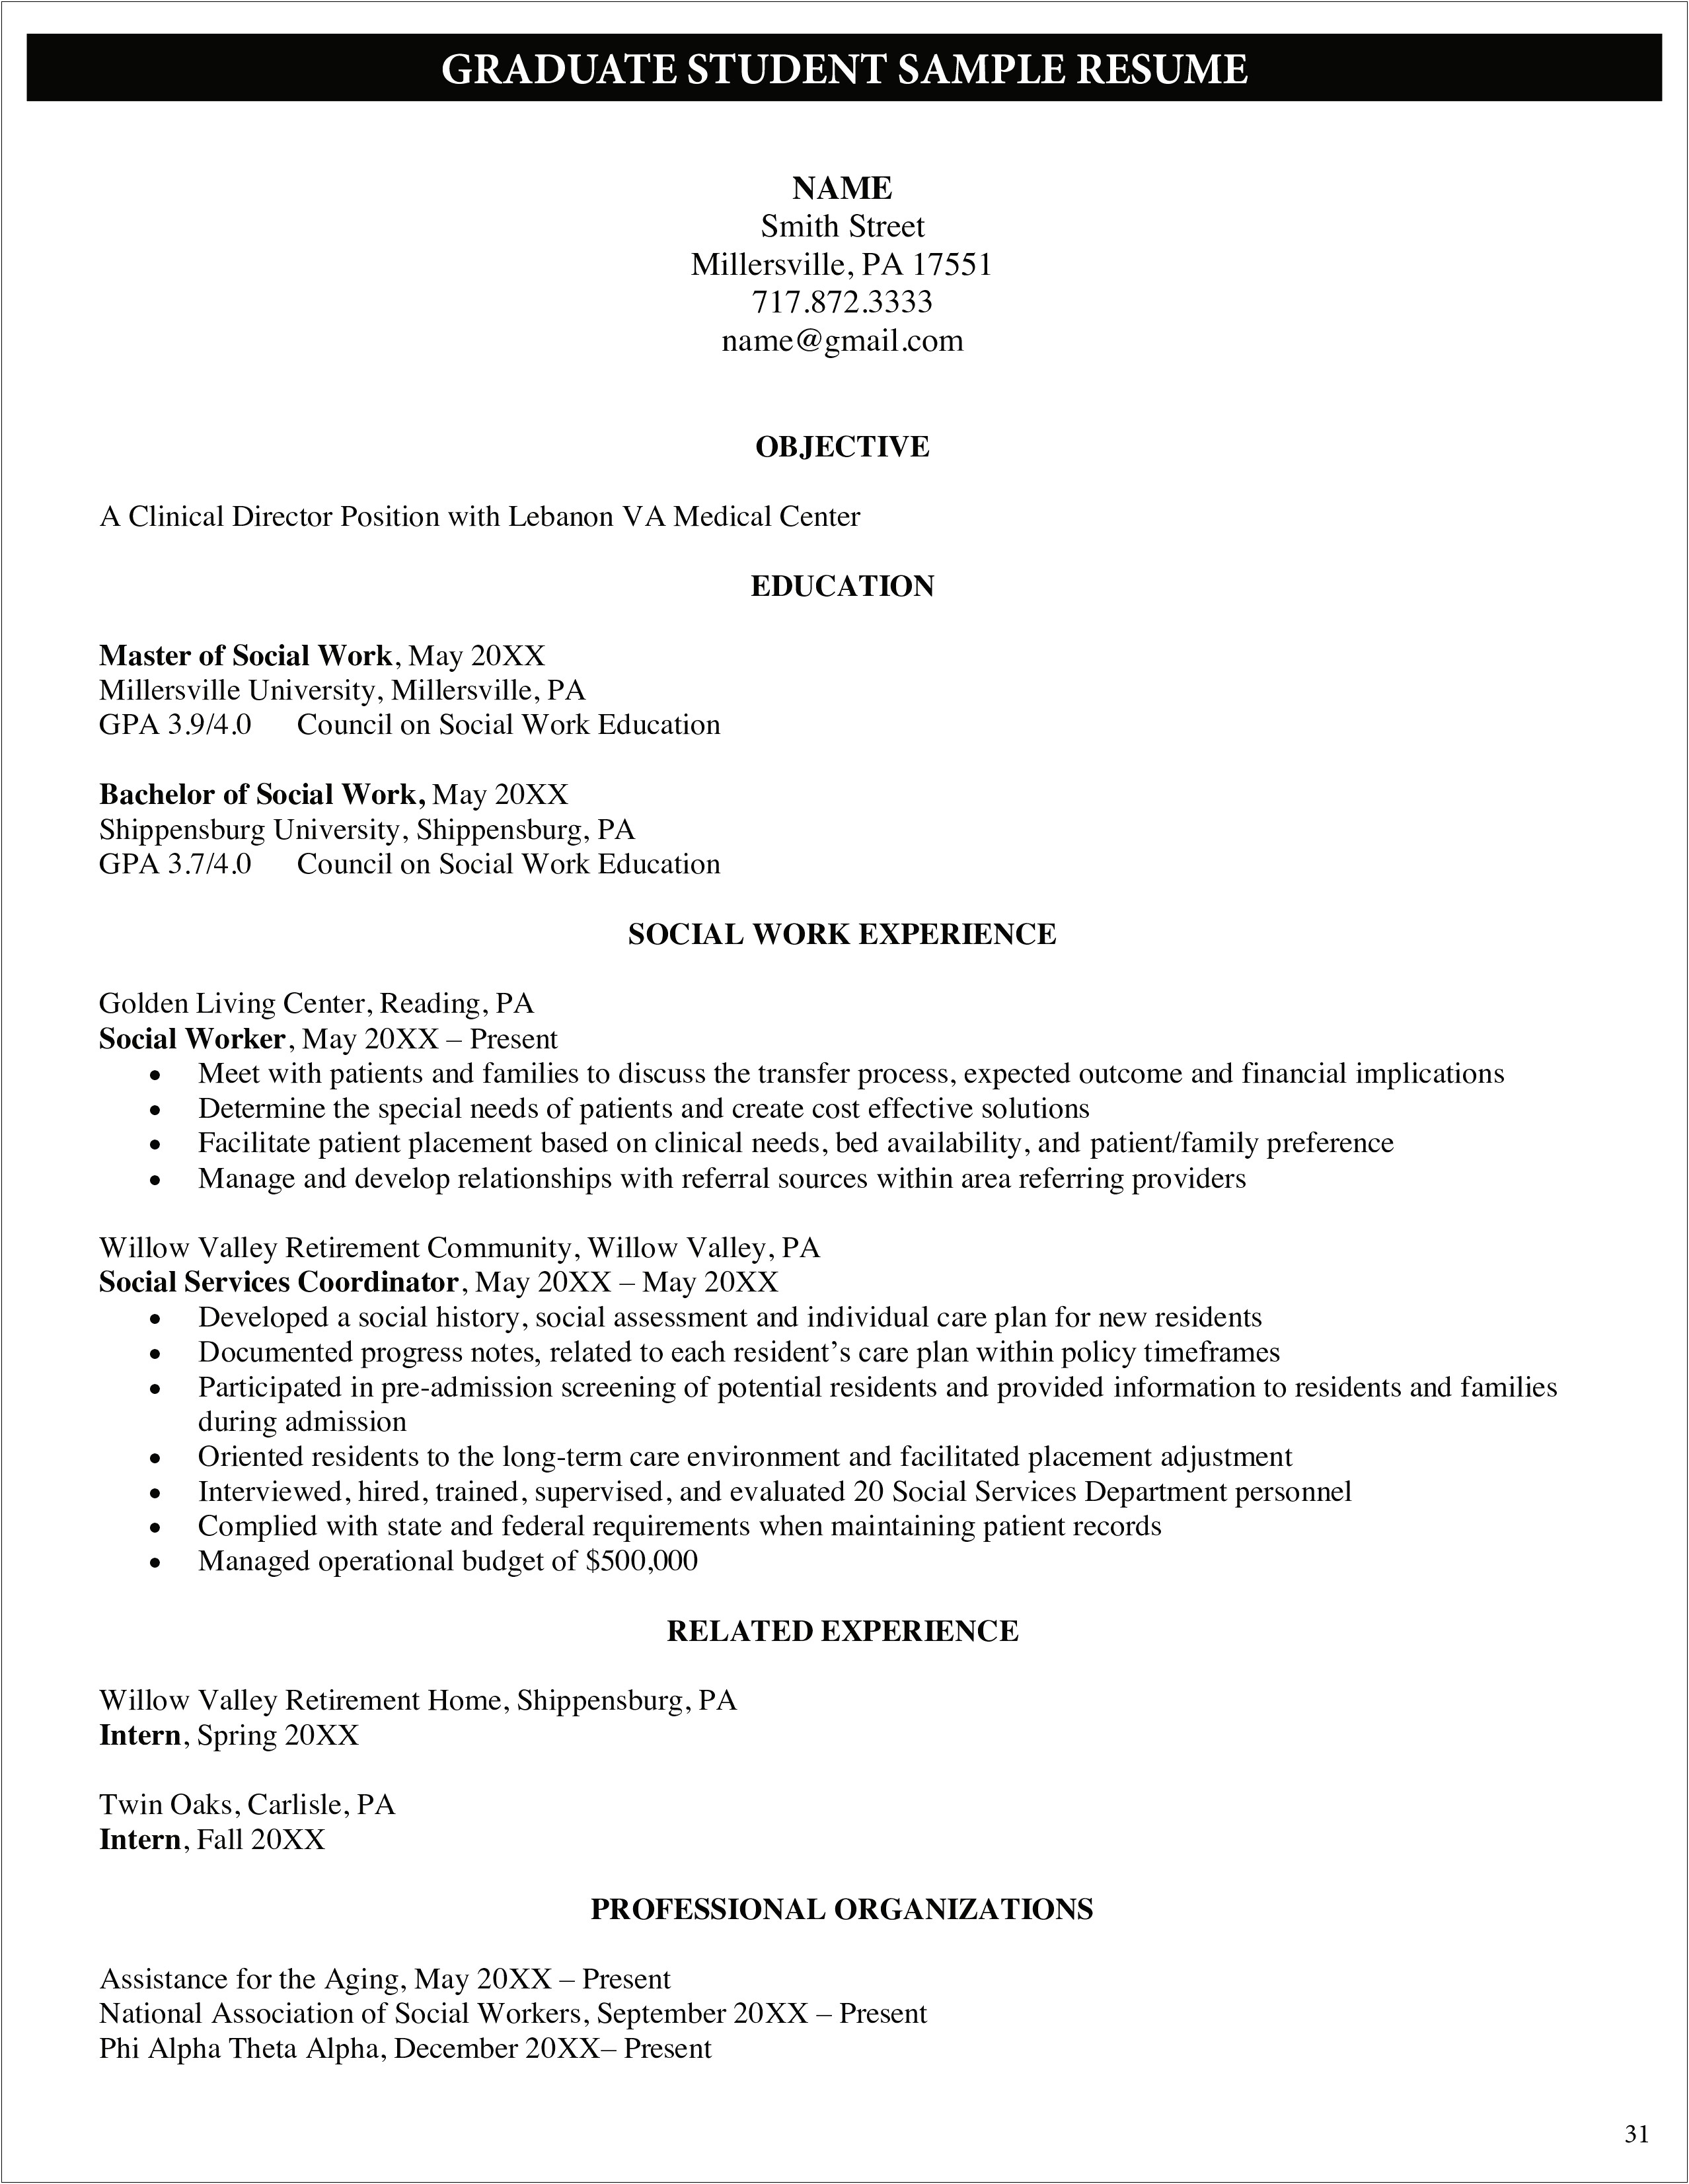 Resume Objective For Social Worker Examples